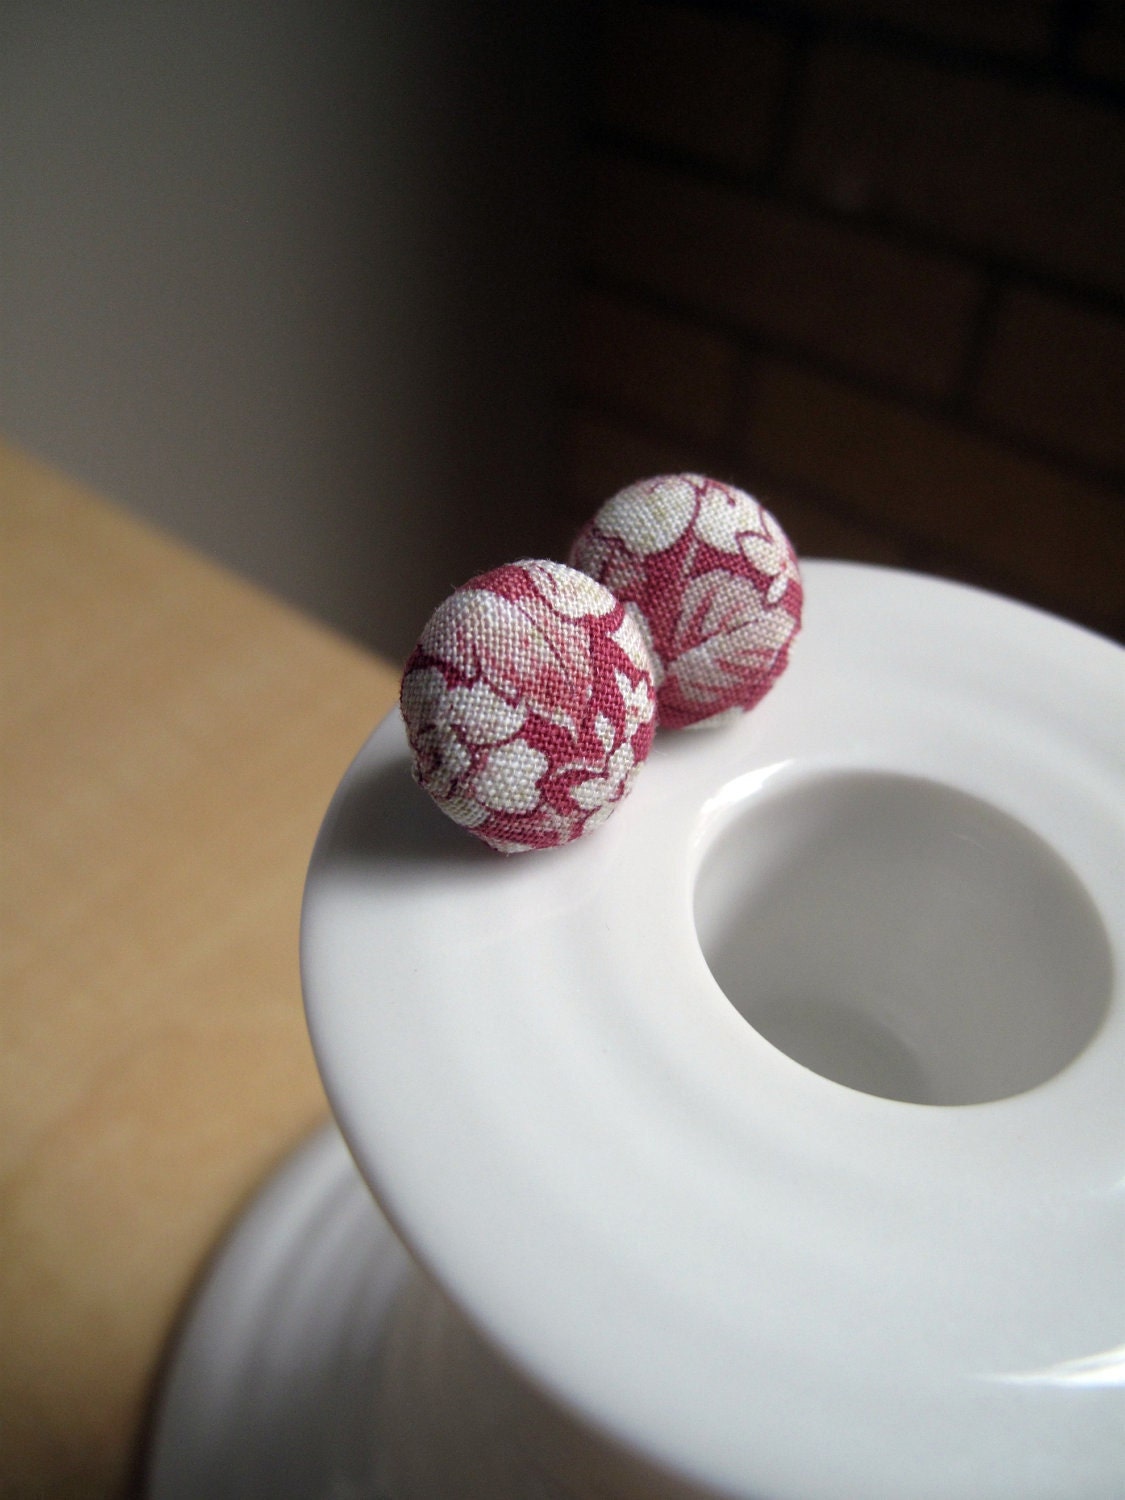 Fabric Covered Button Earrings- Pink Bouquet- Made with Vintage-Inspired Fabric